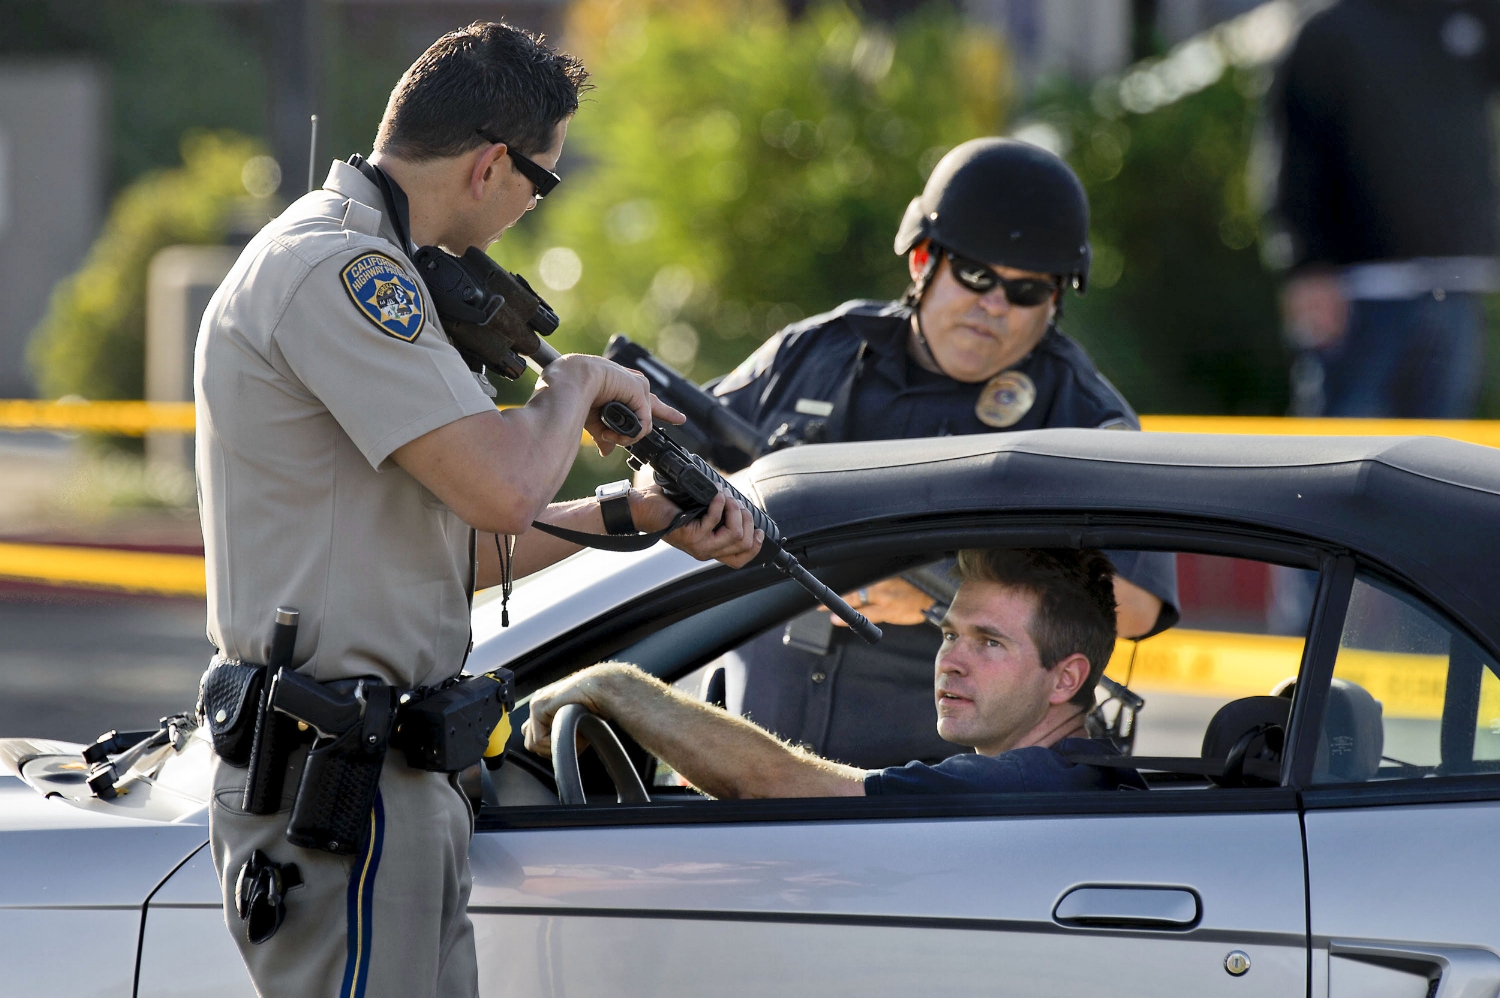  A California Highway Patrol officer and Roseville Police stop a motorist as he leaves a neighborhood where a search continues for a man suspected of shooting an Immigration and Customs Enforcement officer in Roseville on Friday, October 25, 2013. In